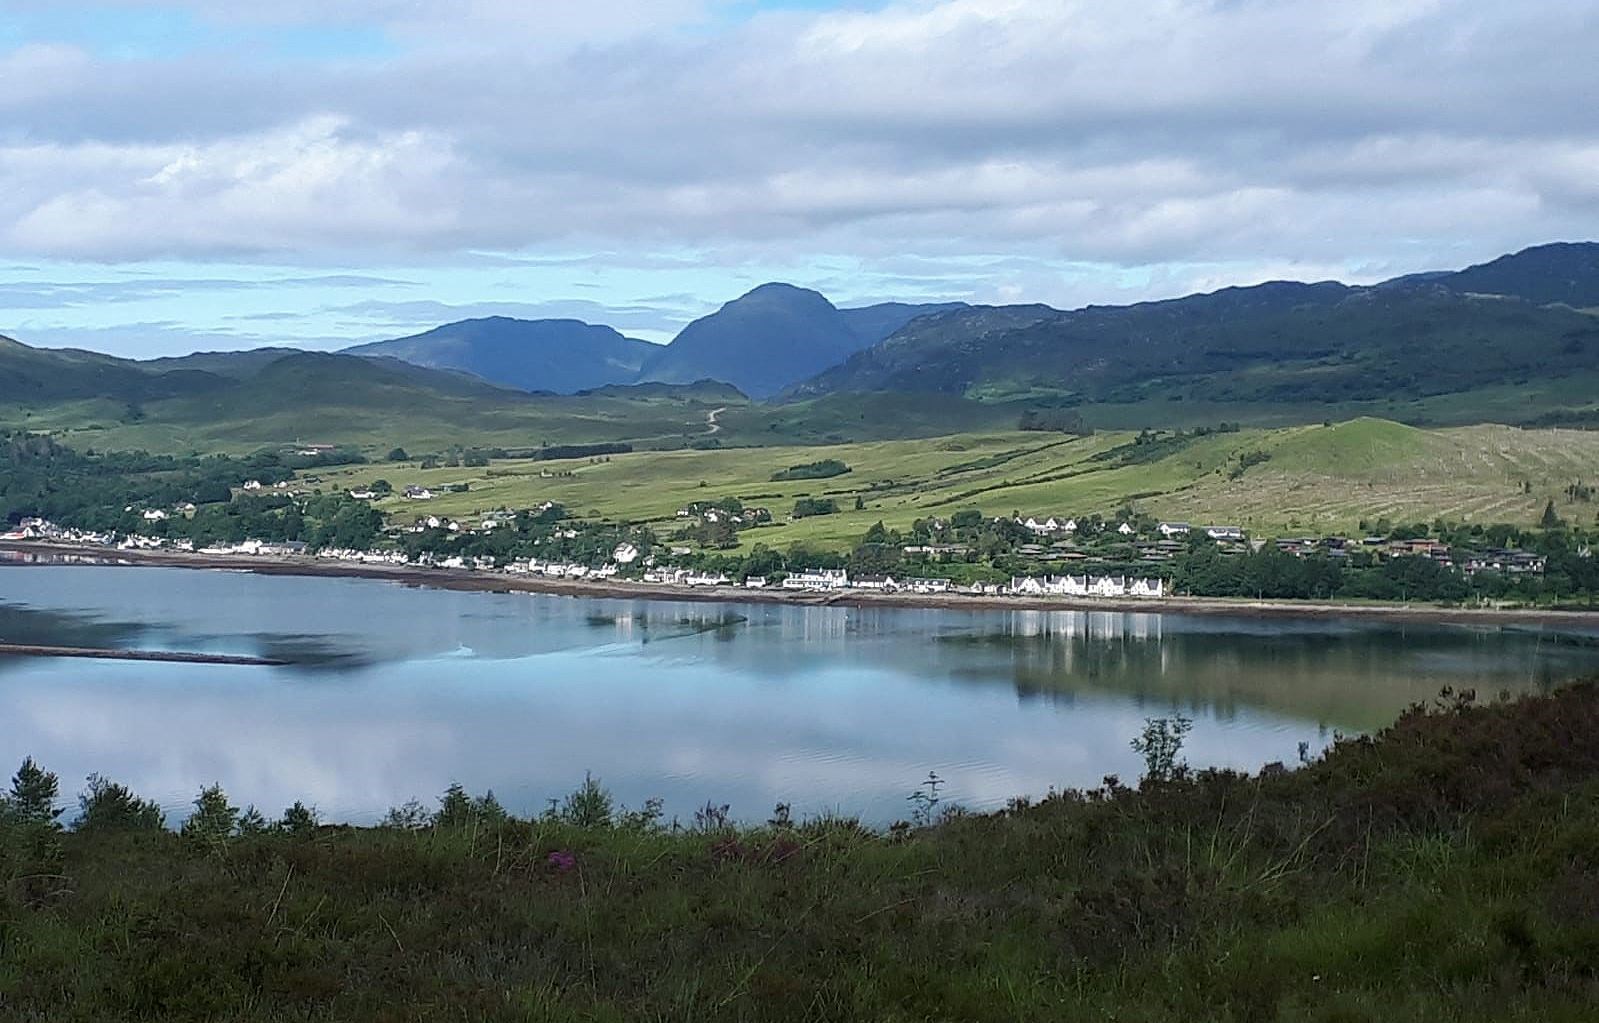 Looking towards the village of Lochcarron from above the southern shore of Loch Carron.